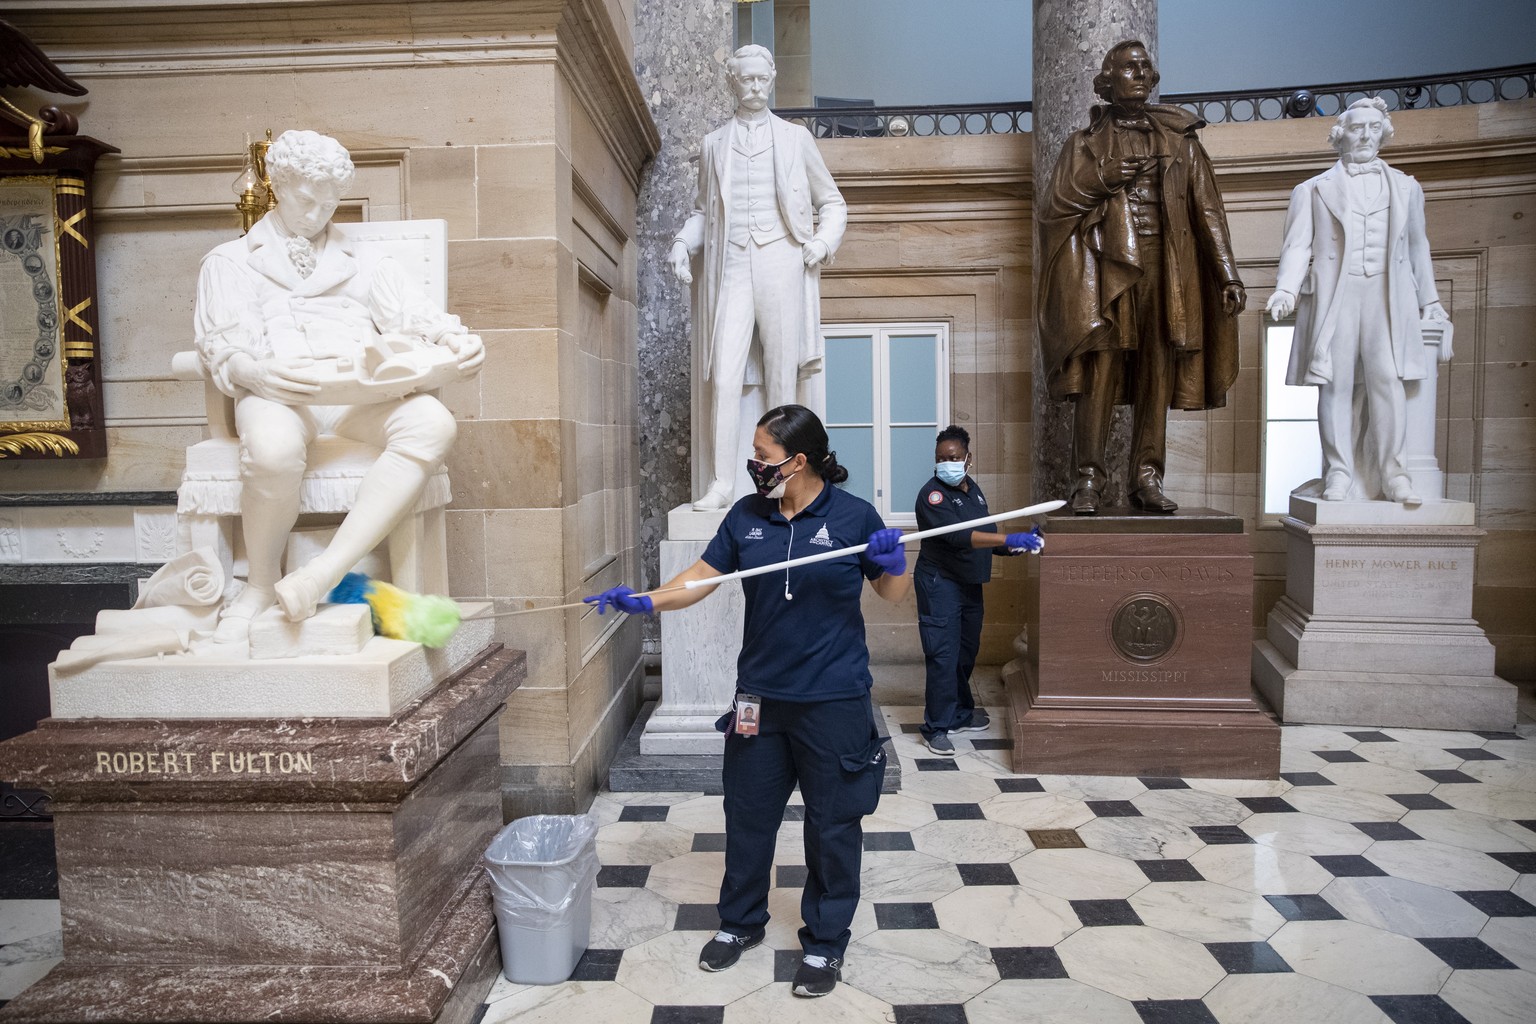 epa08925002 A cleaning crew dusts residue from the pedestals of the statues in Statuary Hall inside the US Capitol in Washington, DC, USA, 07 January 2021, the morning after various groups of Presiden ...